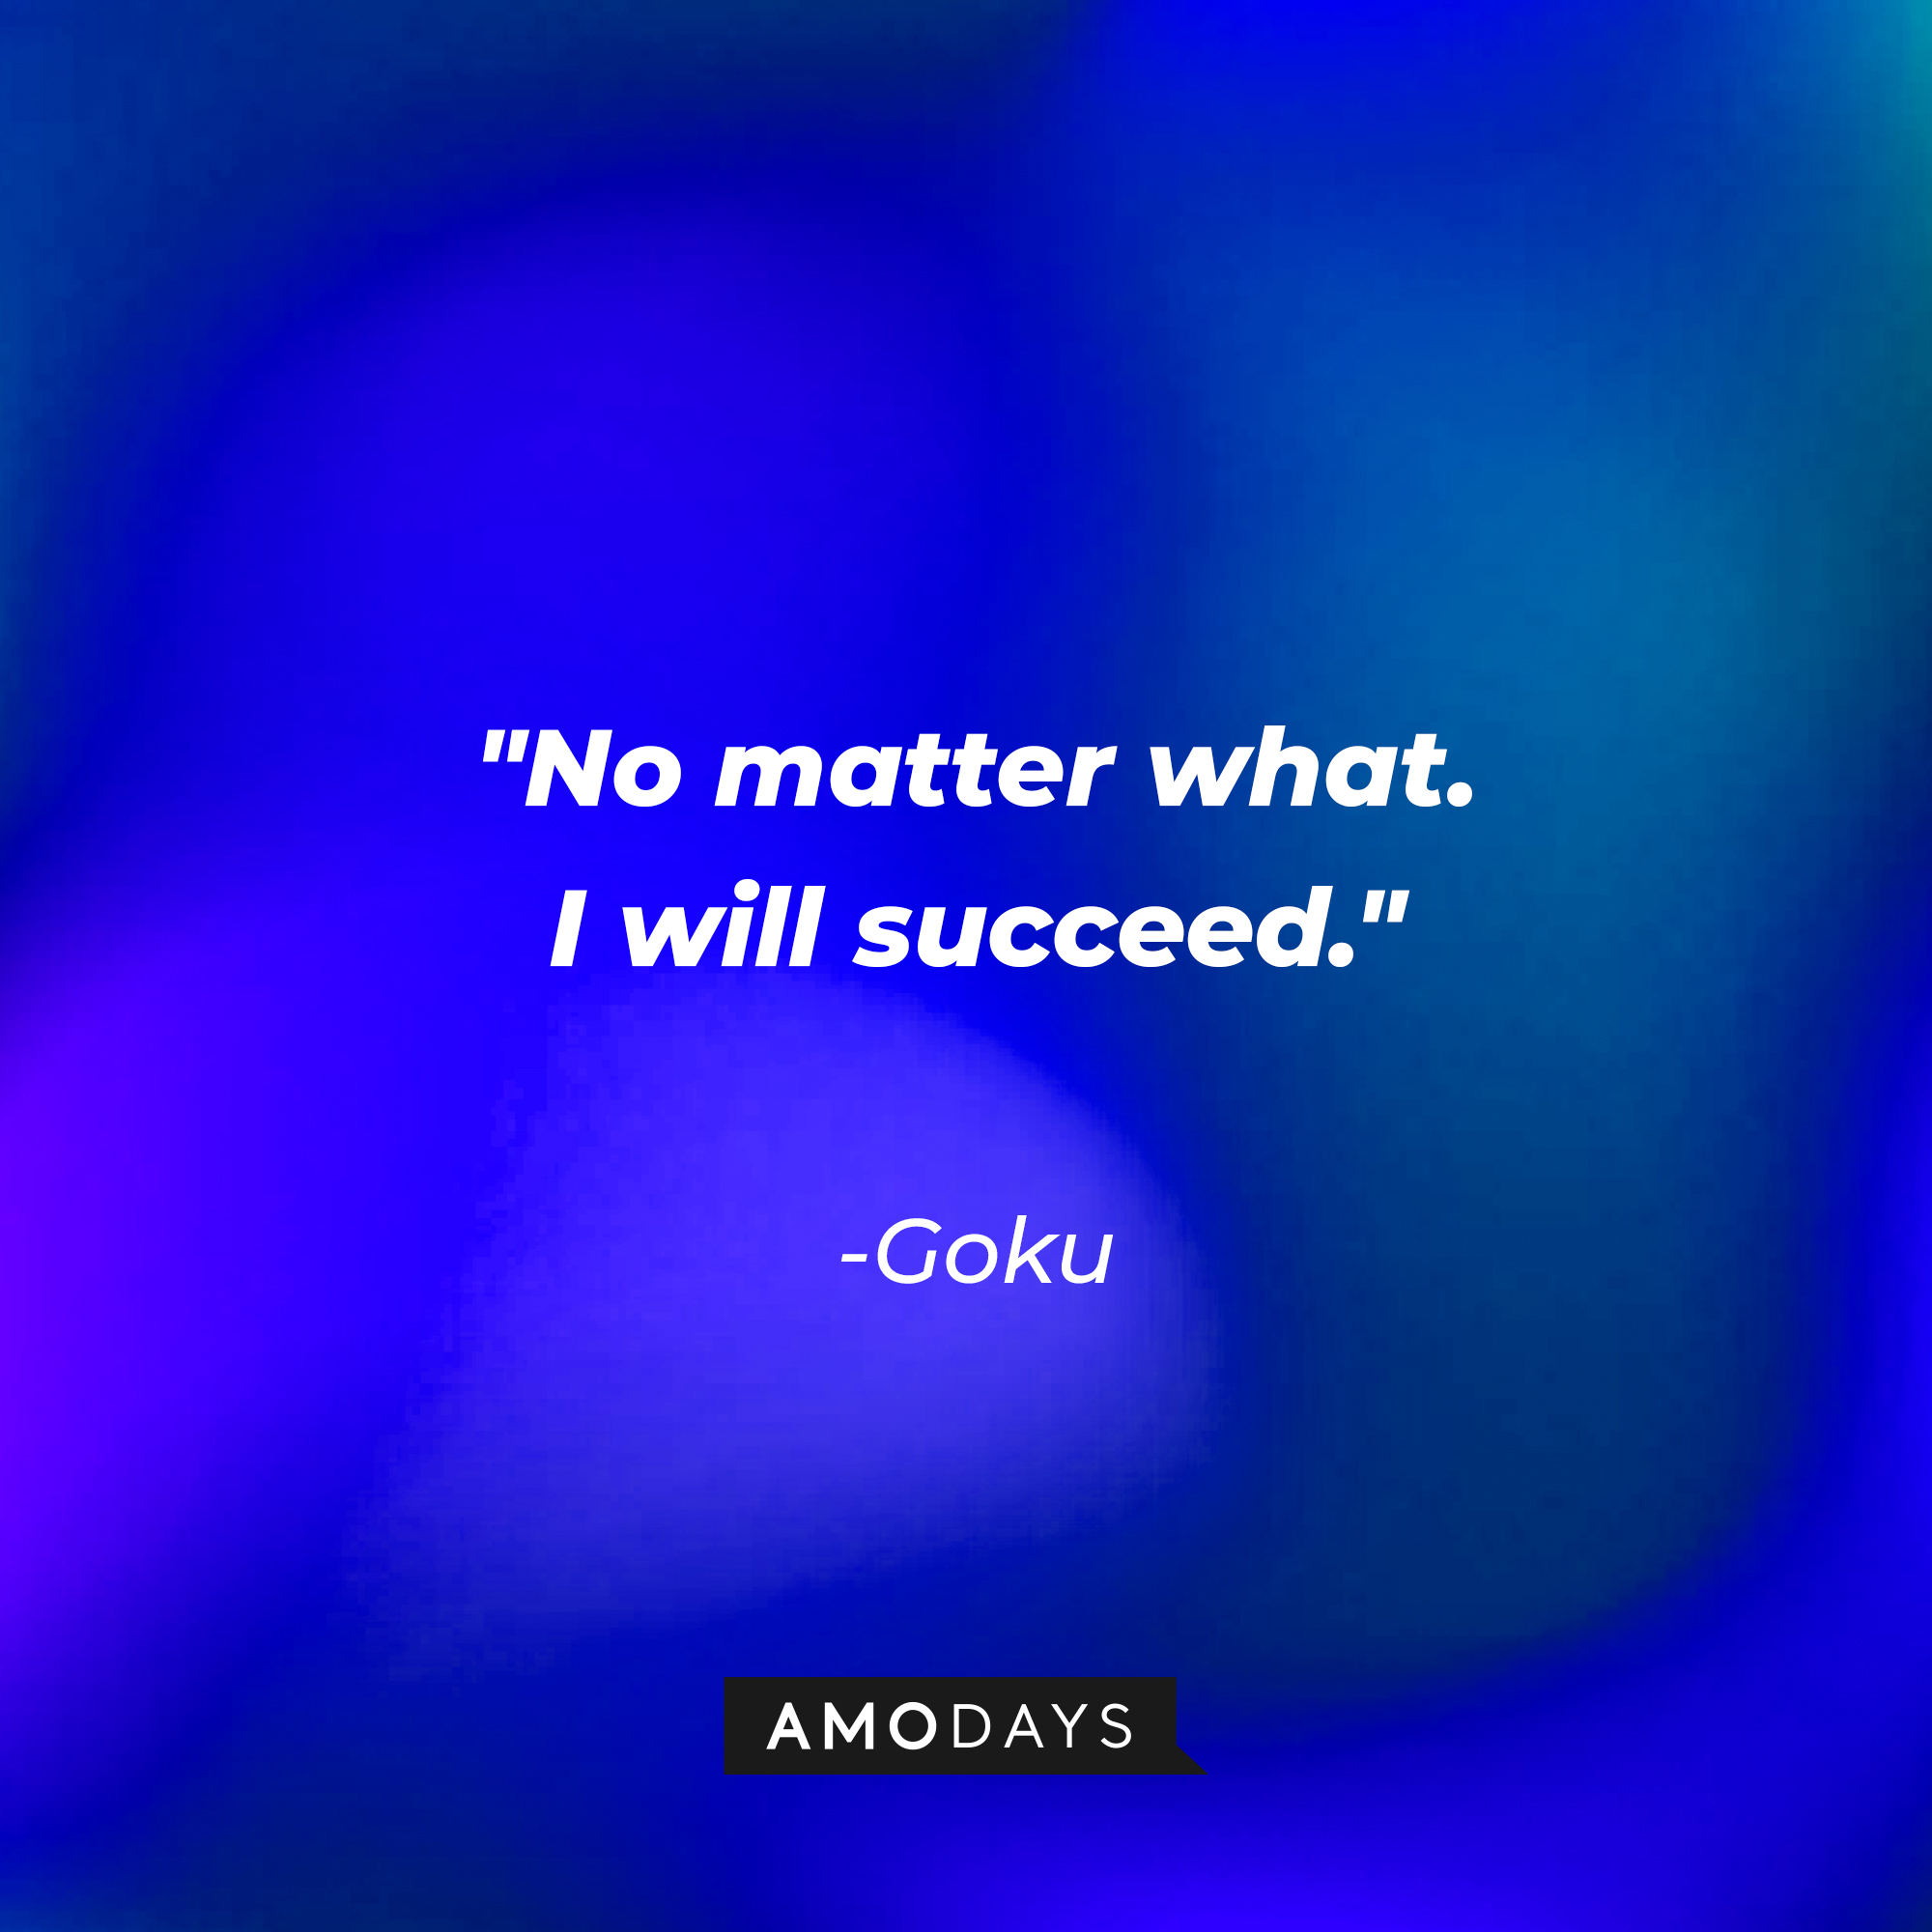 Goku's quote: "No matter what. I will succeed." | Source: youtube.com/DragonballBlack